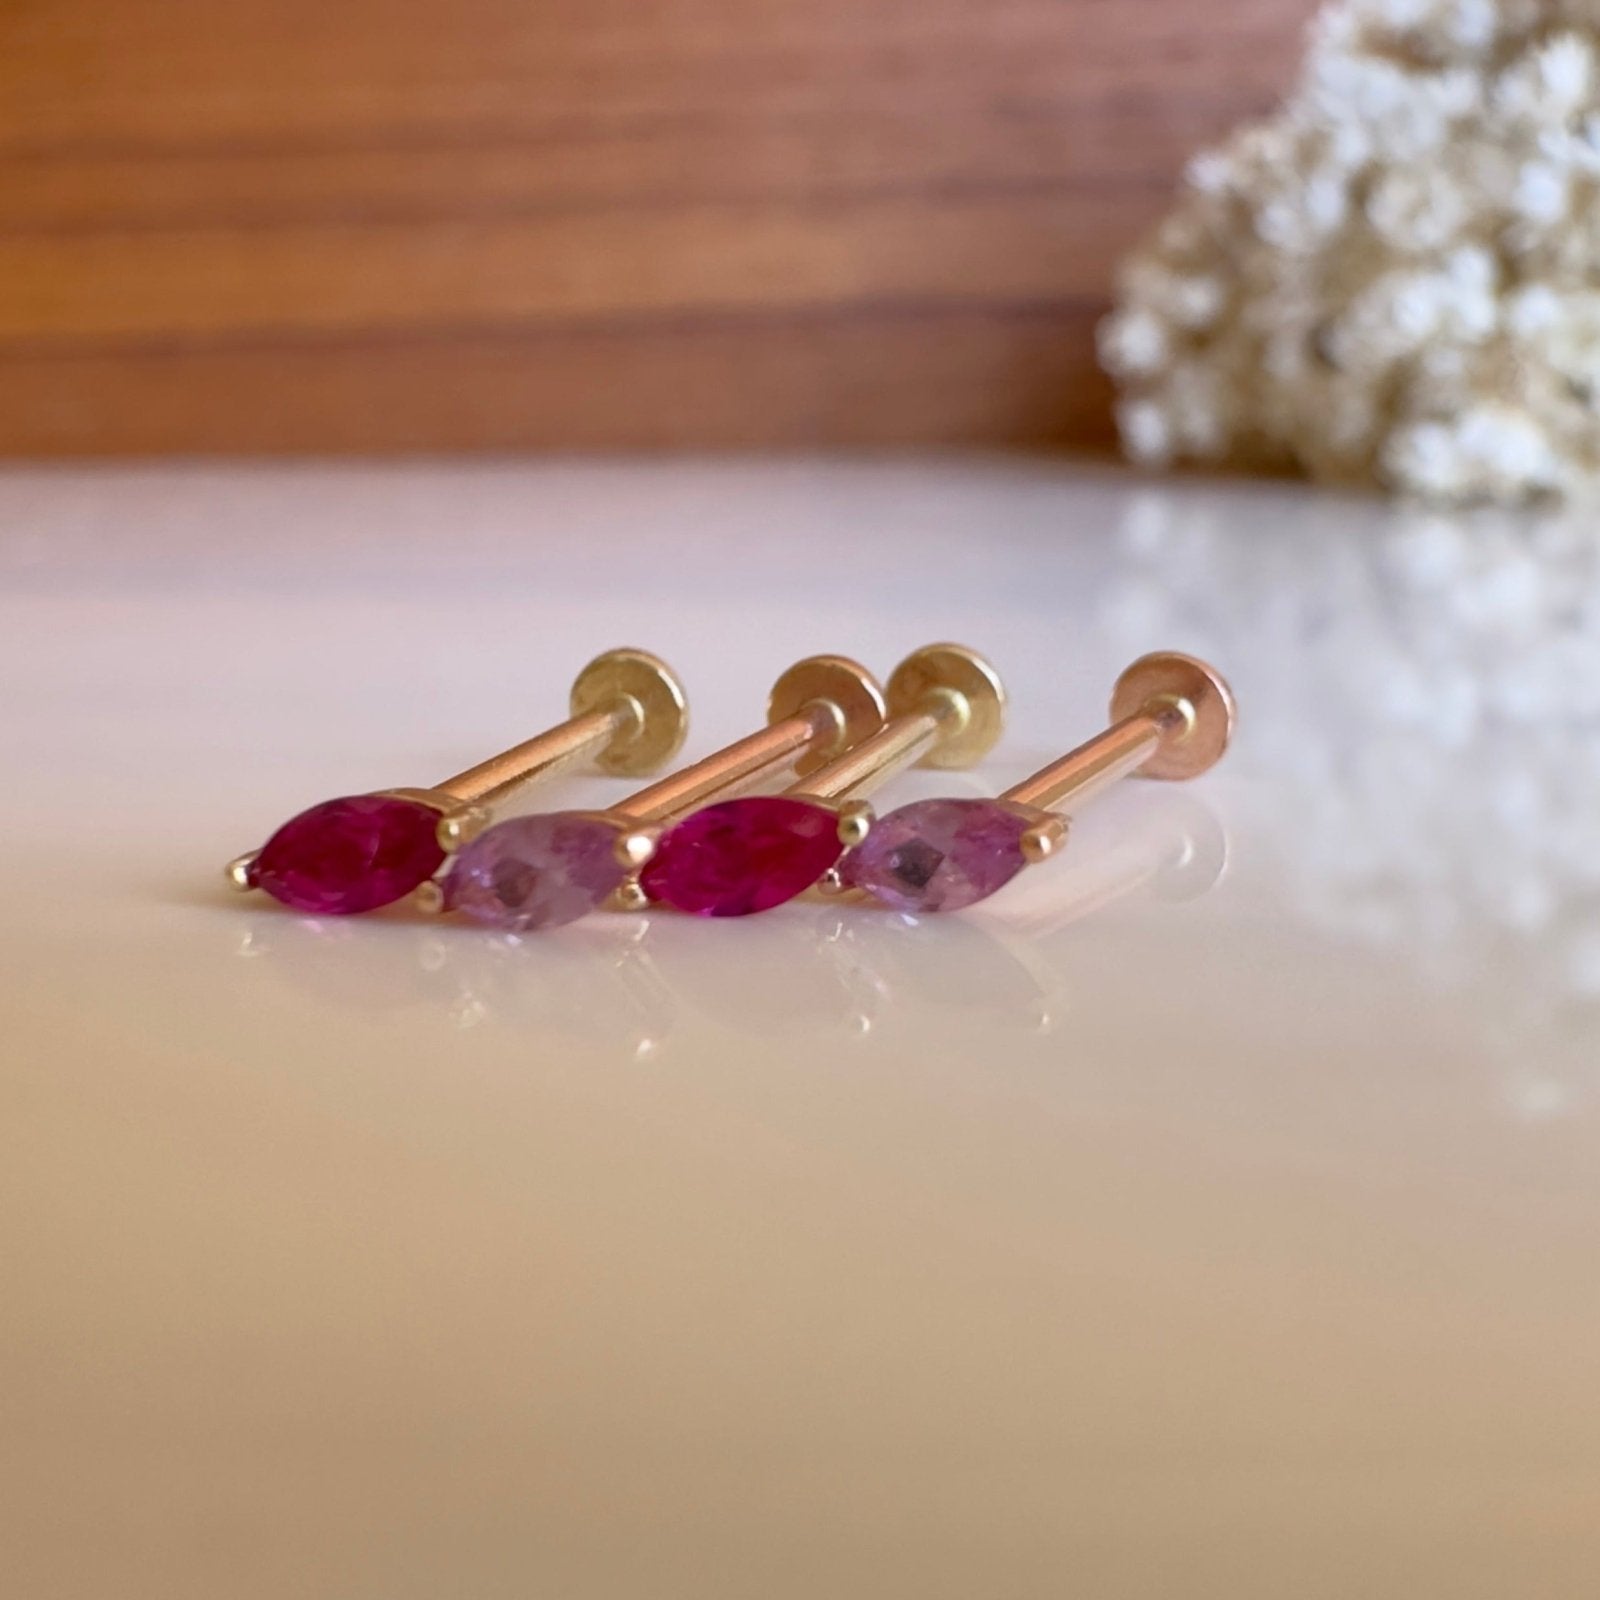 Marquise Pink Ruby Flat Back Earring Earrings Estella Collection #product_description# 18318 14k Birthstone Birthstone Earrings #tag4# #tag5# #tag6# #tag7# #tag8# #tag9# #tag10# 5MM